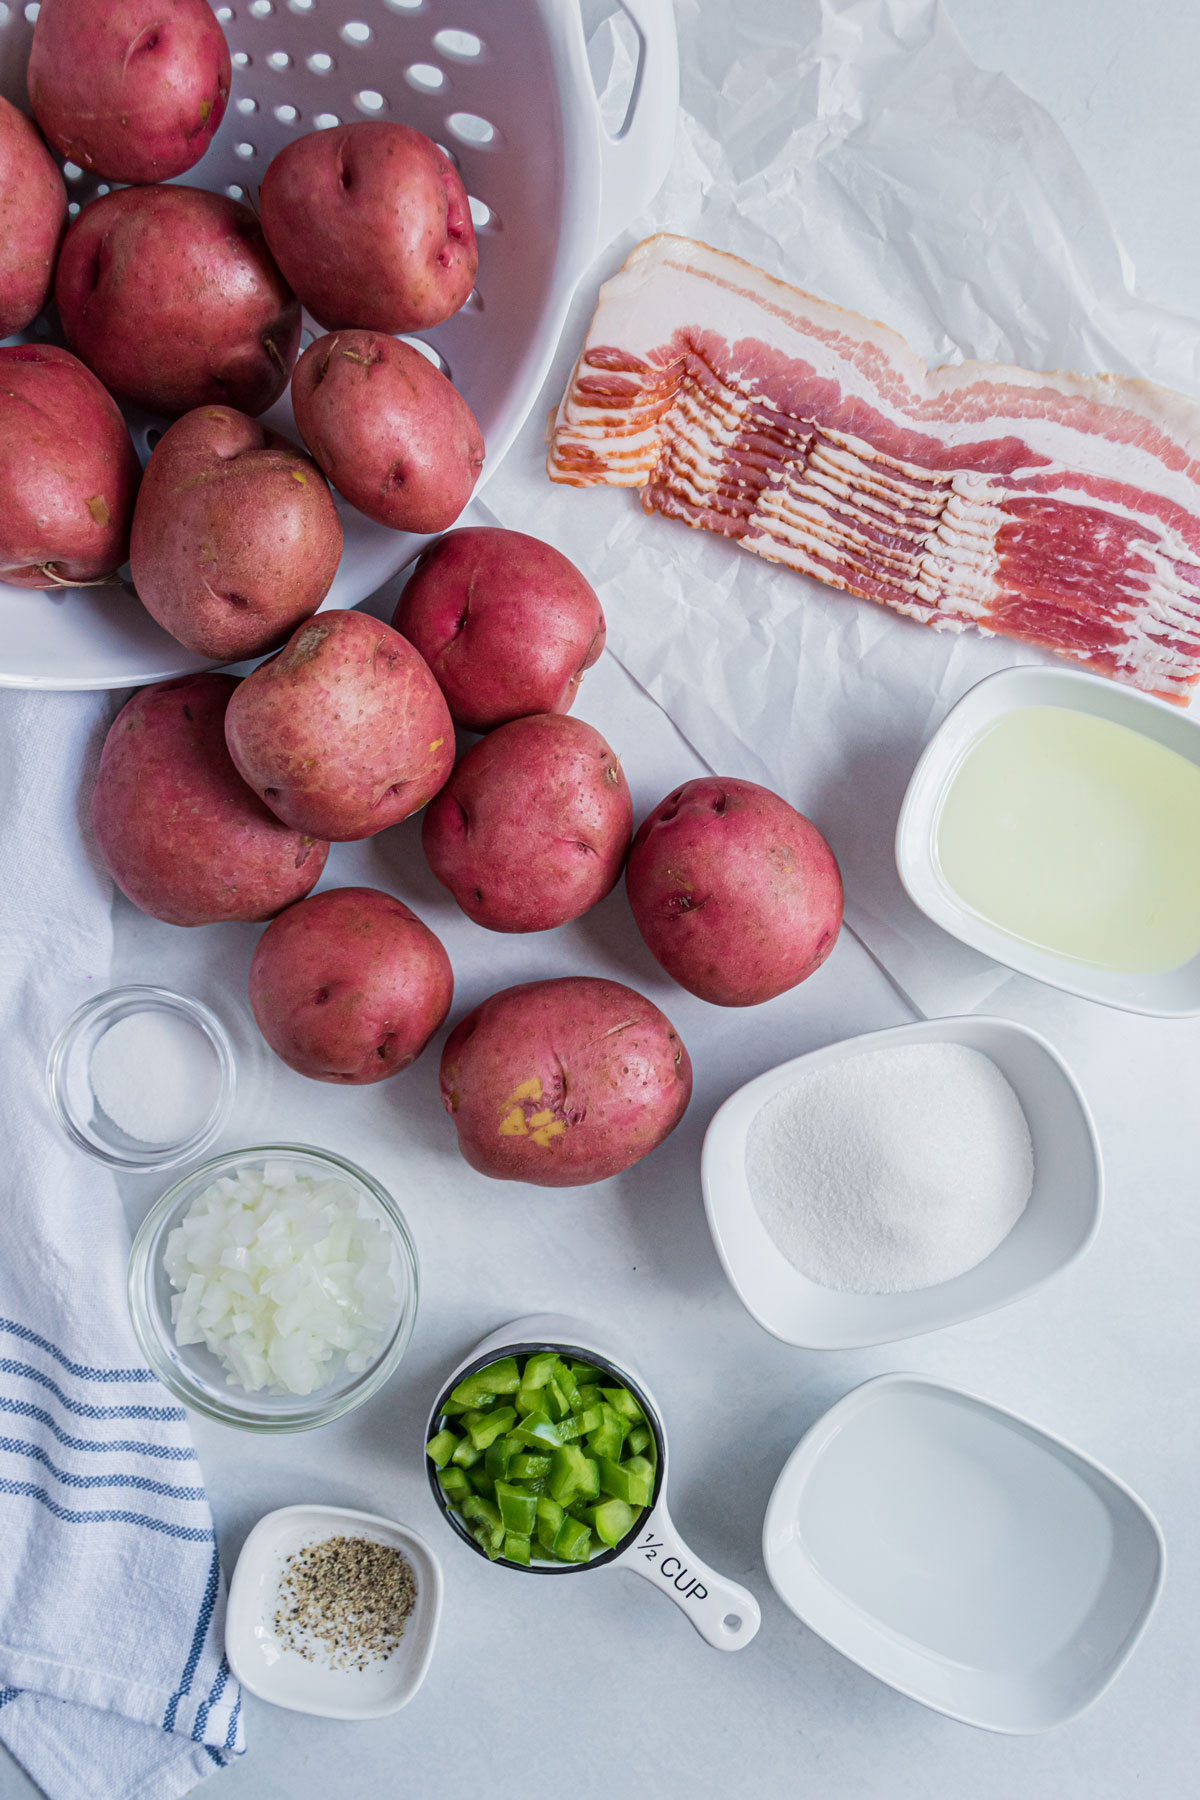 Flatlay of ingredients of Hot German Potato Salad. This includes small red potatoes, bacon, onion, green pepper, salt, black pepper, white vinegar, tablespoons of sugar and vegetable oil.